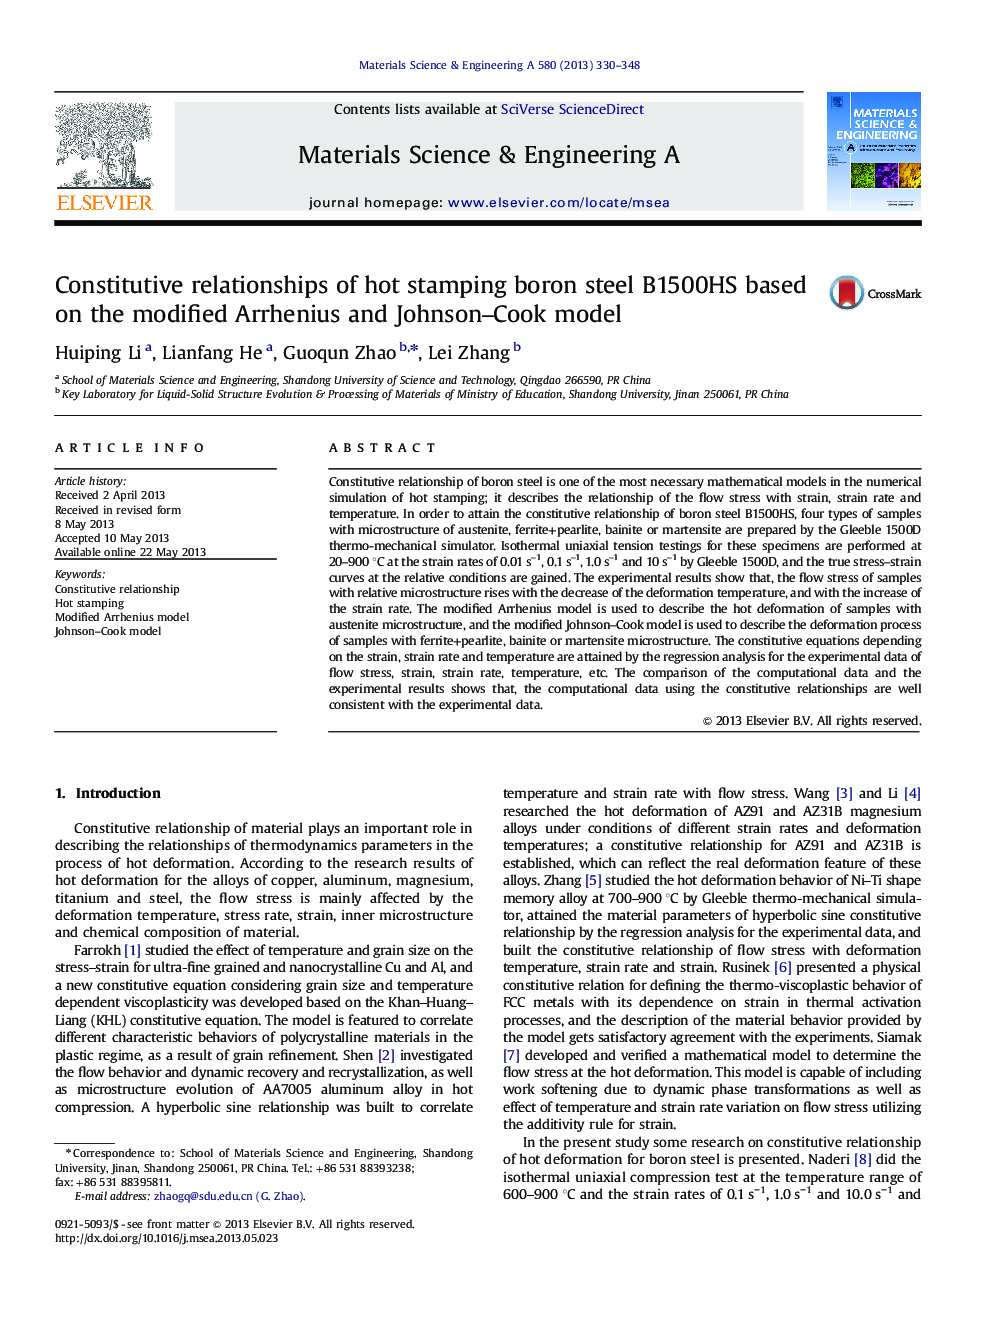 Constitutive relationships of hot stamping boron steel B1500HS based on the modified Arrhenius and Johnson-Cook model